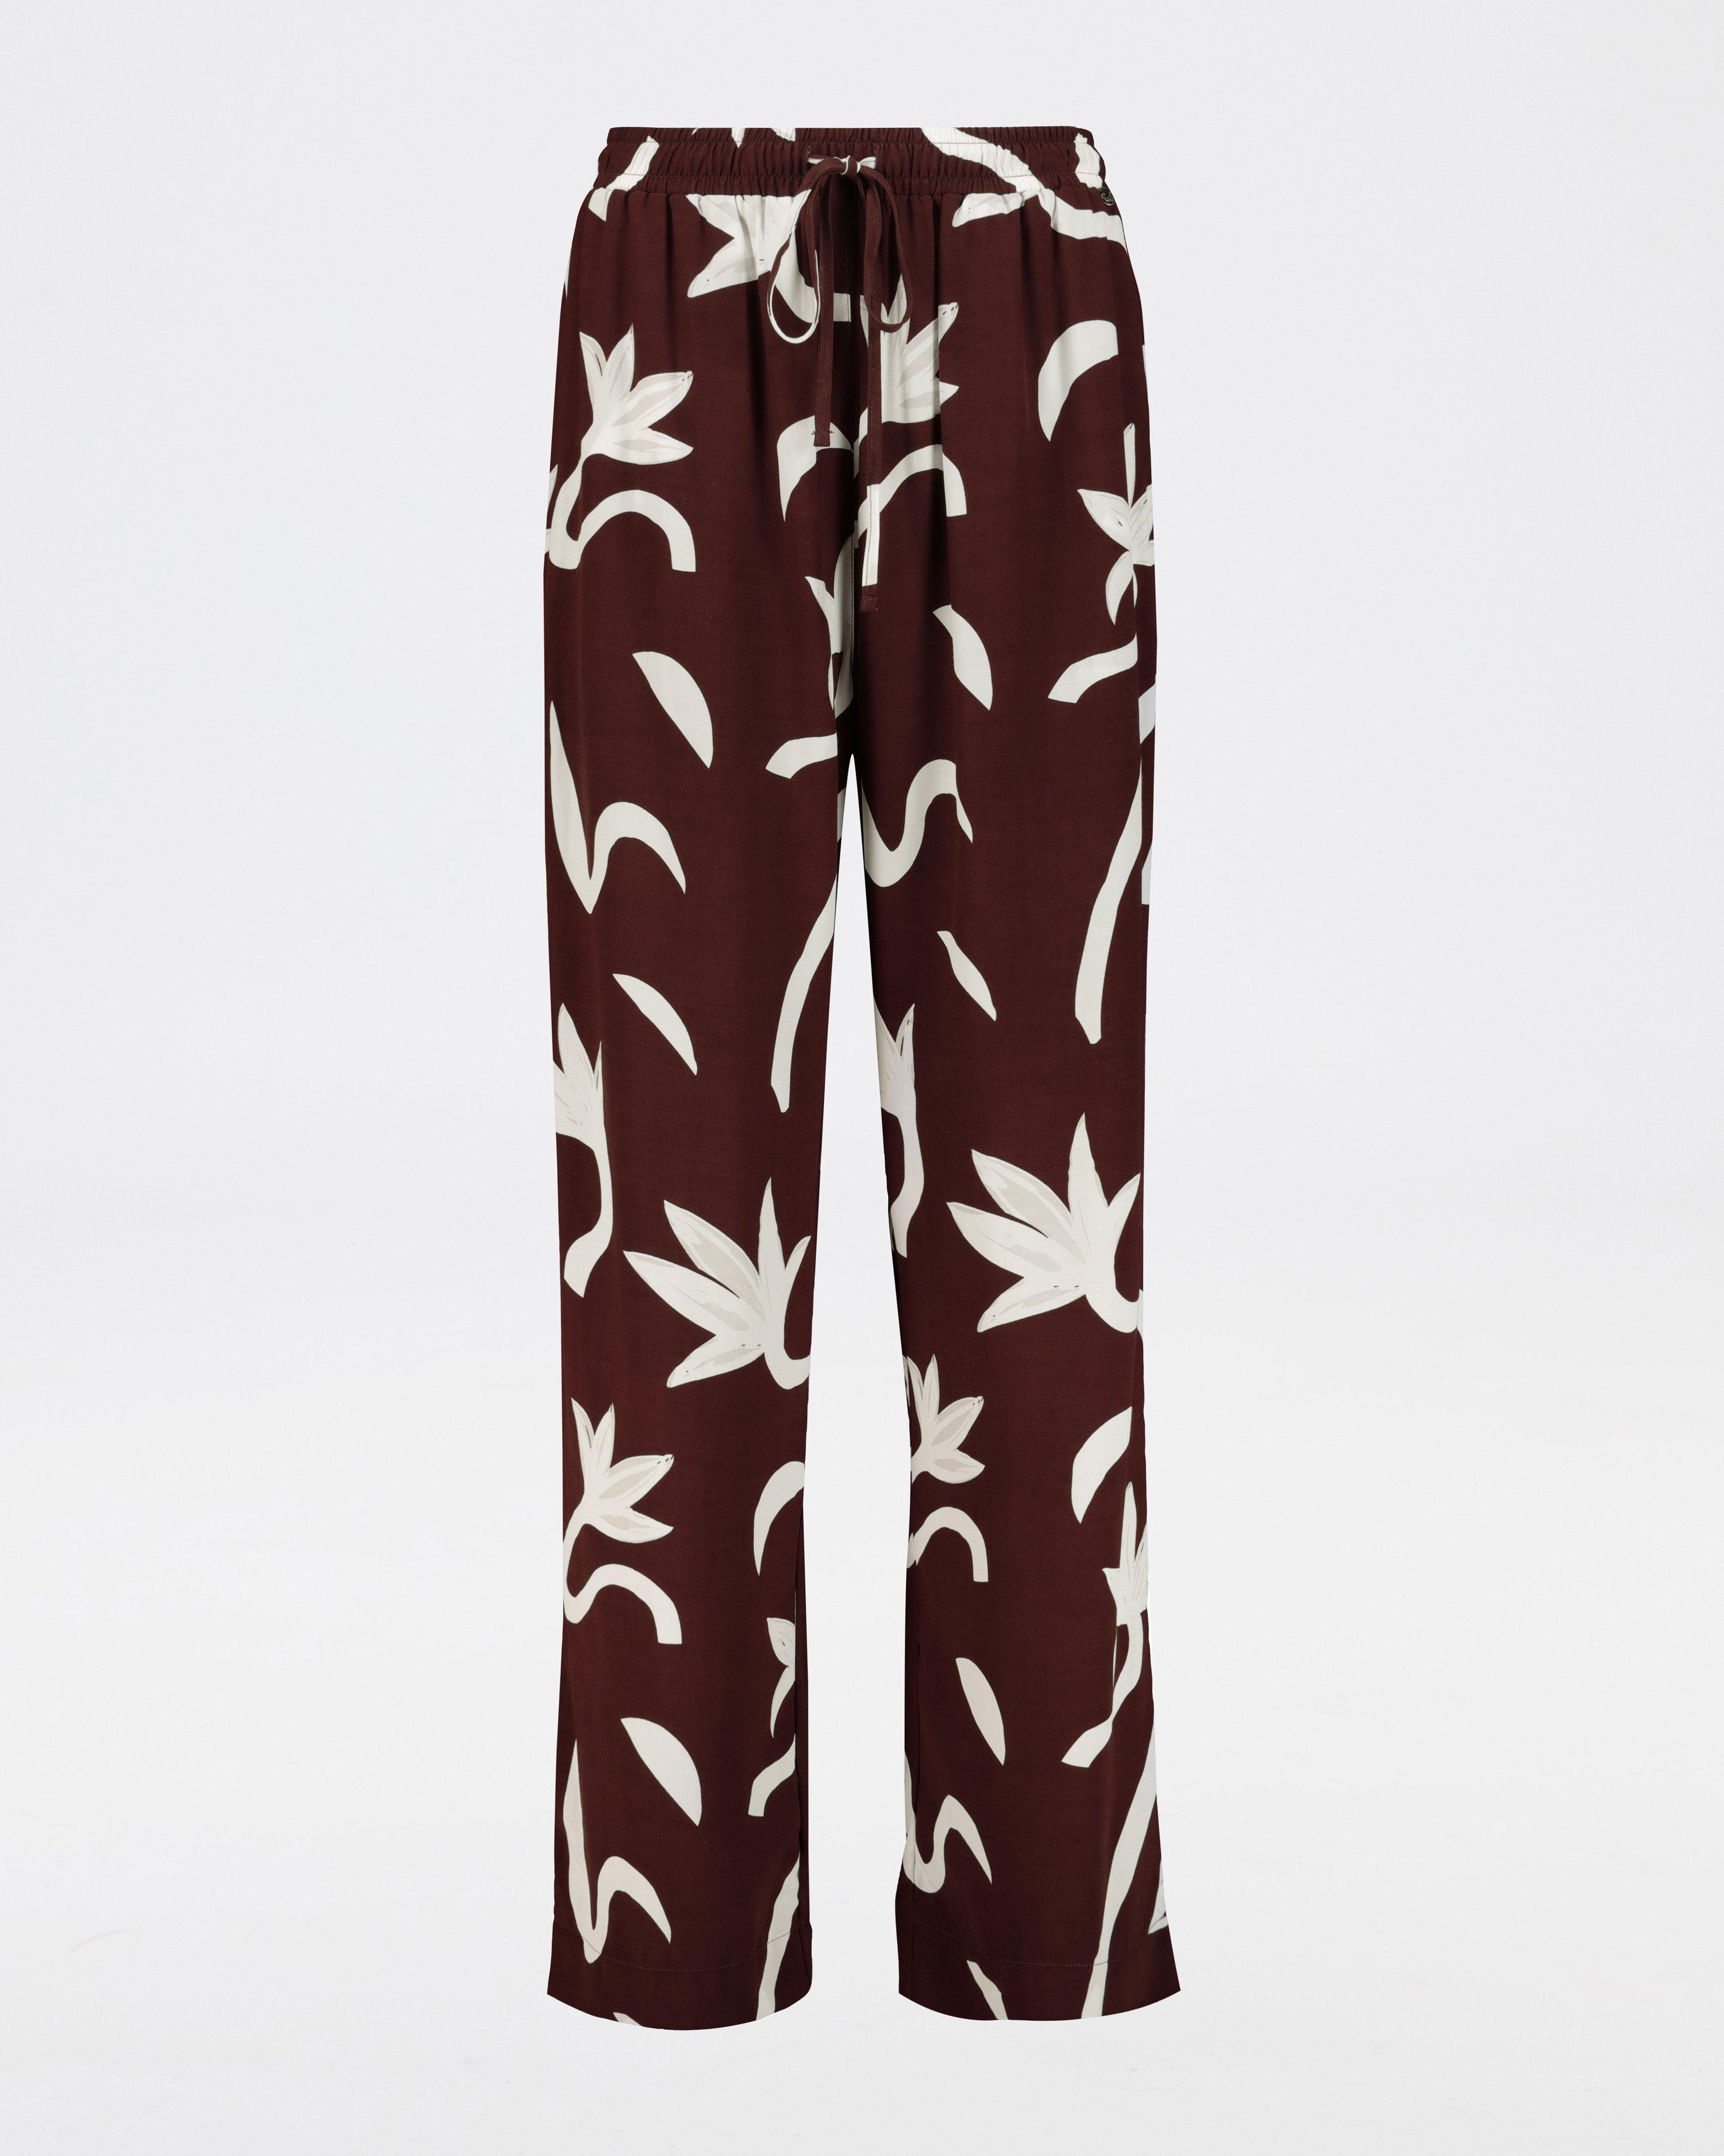 Women’s Suki Relaxed-Fit Pants -  Chocolate